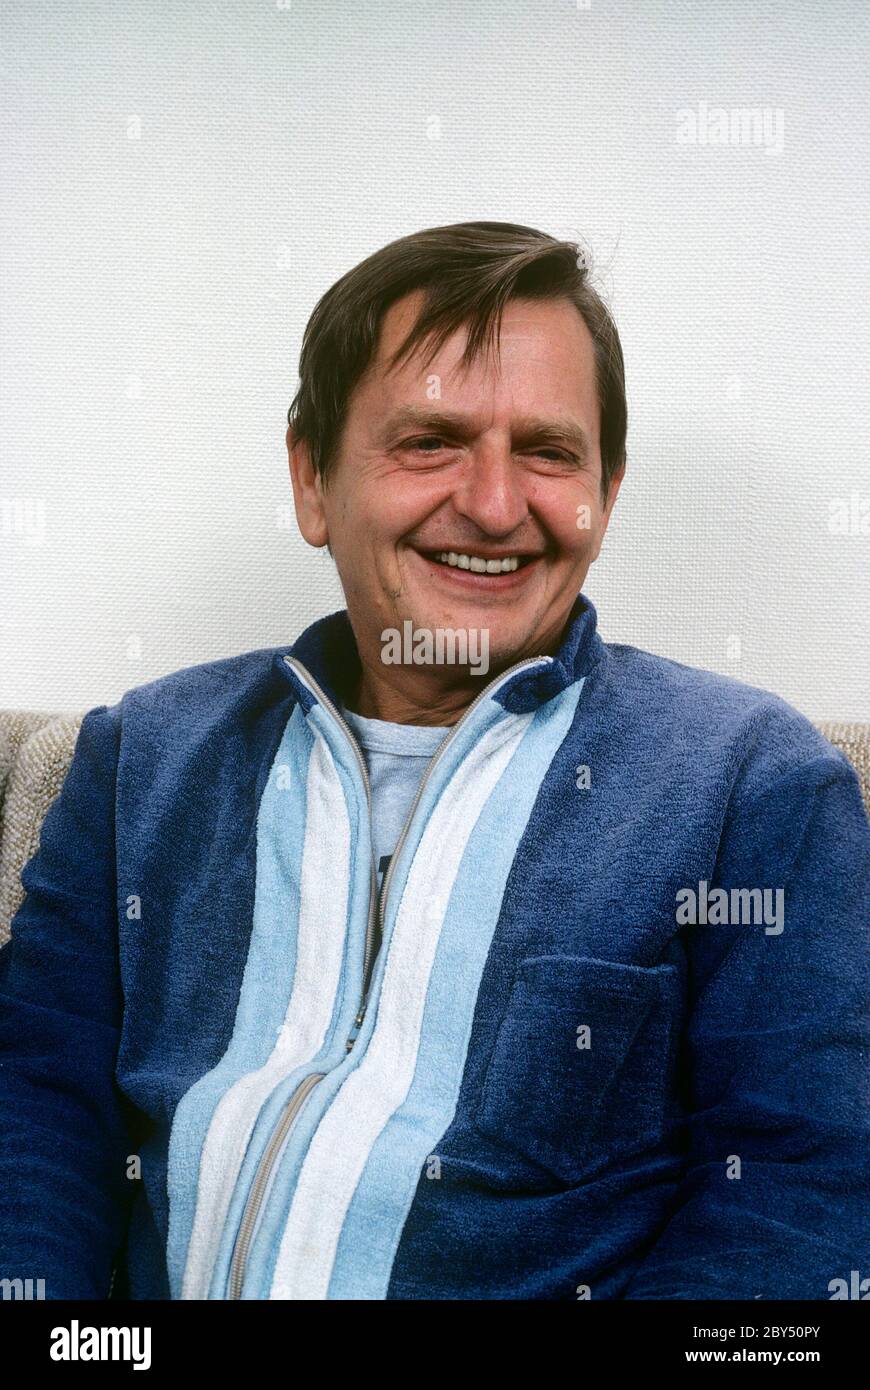 Olof Palme. Swedish social democratic politican and prime minister. Born october 14 1927. Murdered february 28 1985. Pictured here 1979 Stock Photo